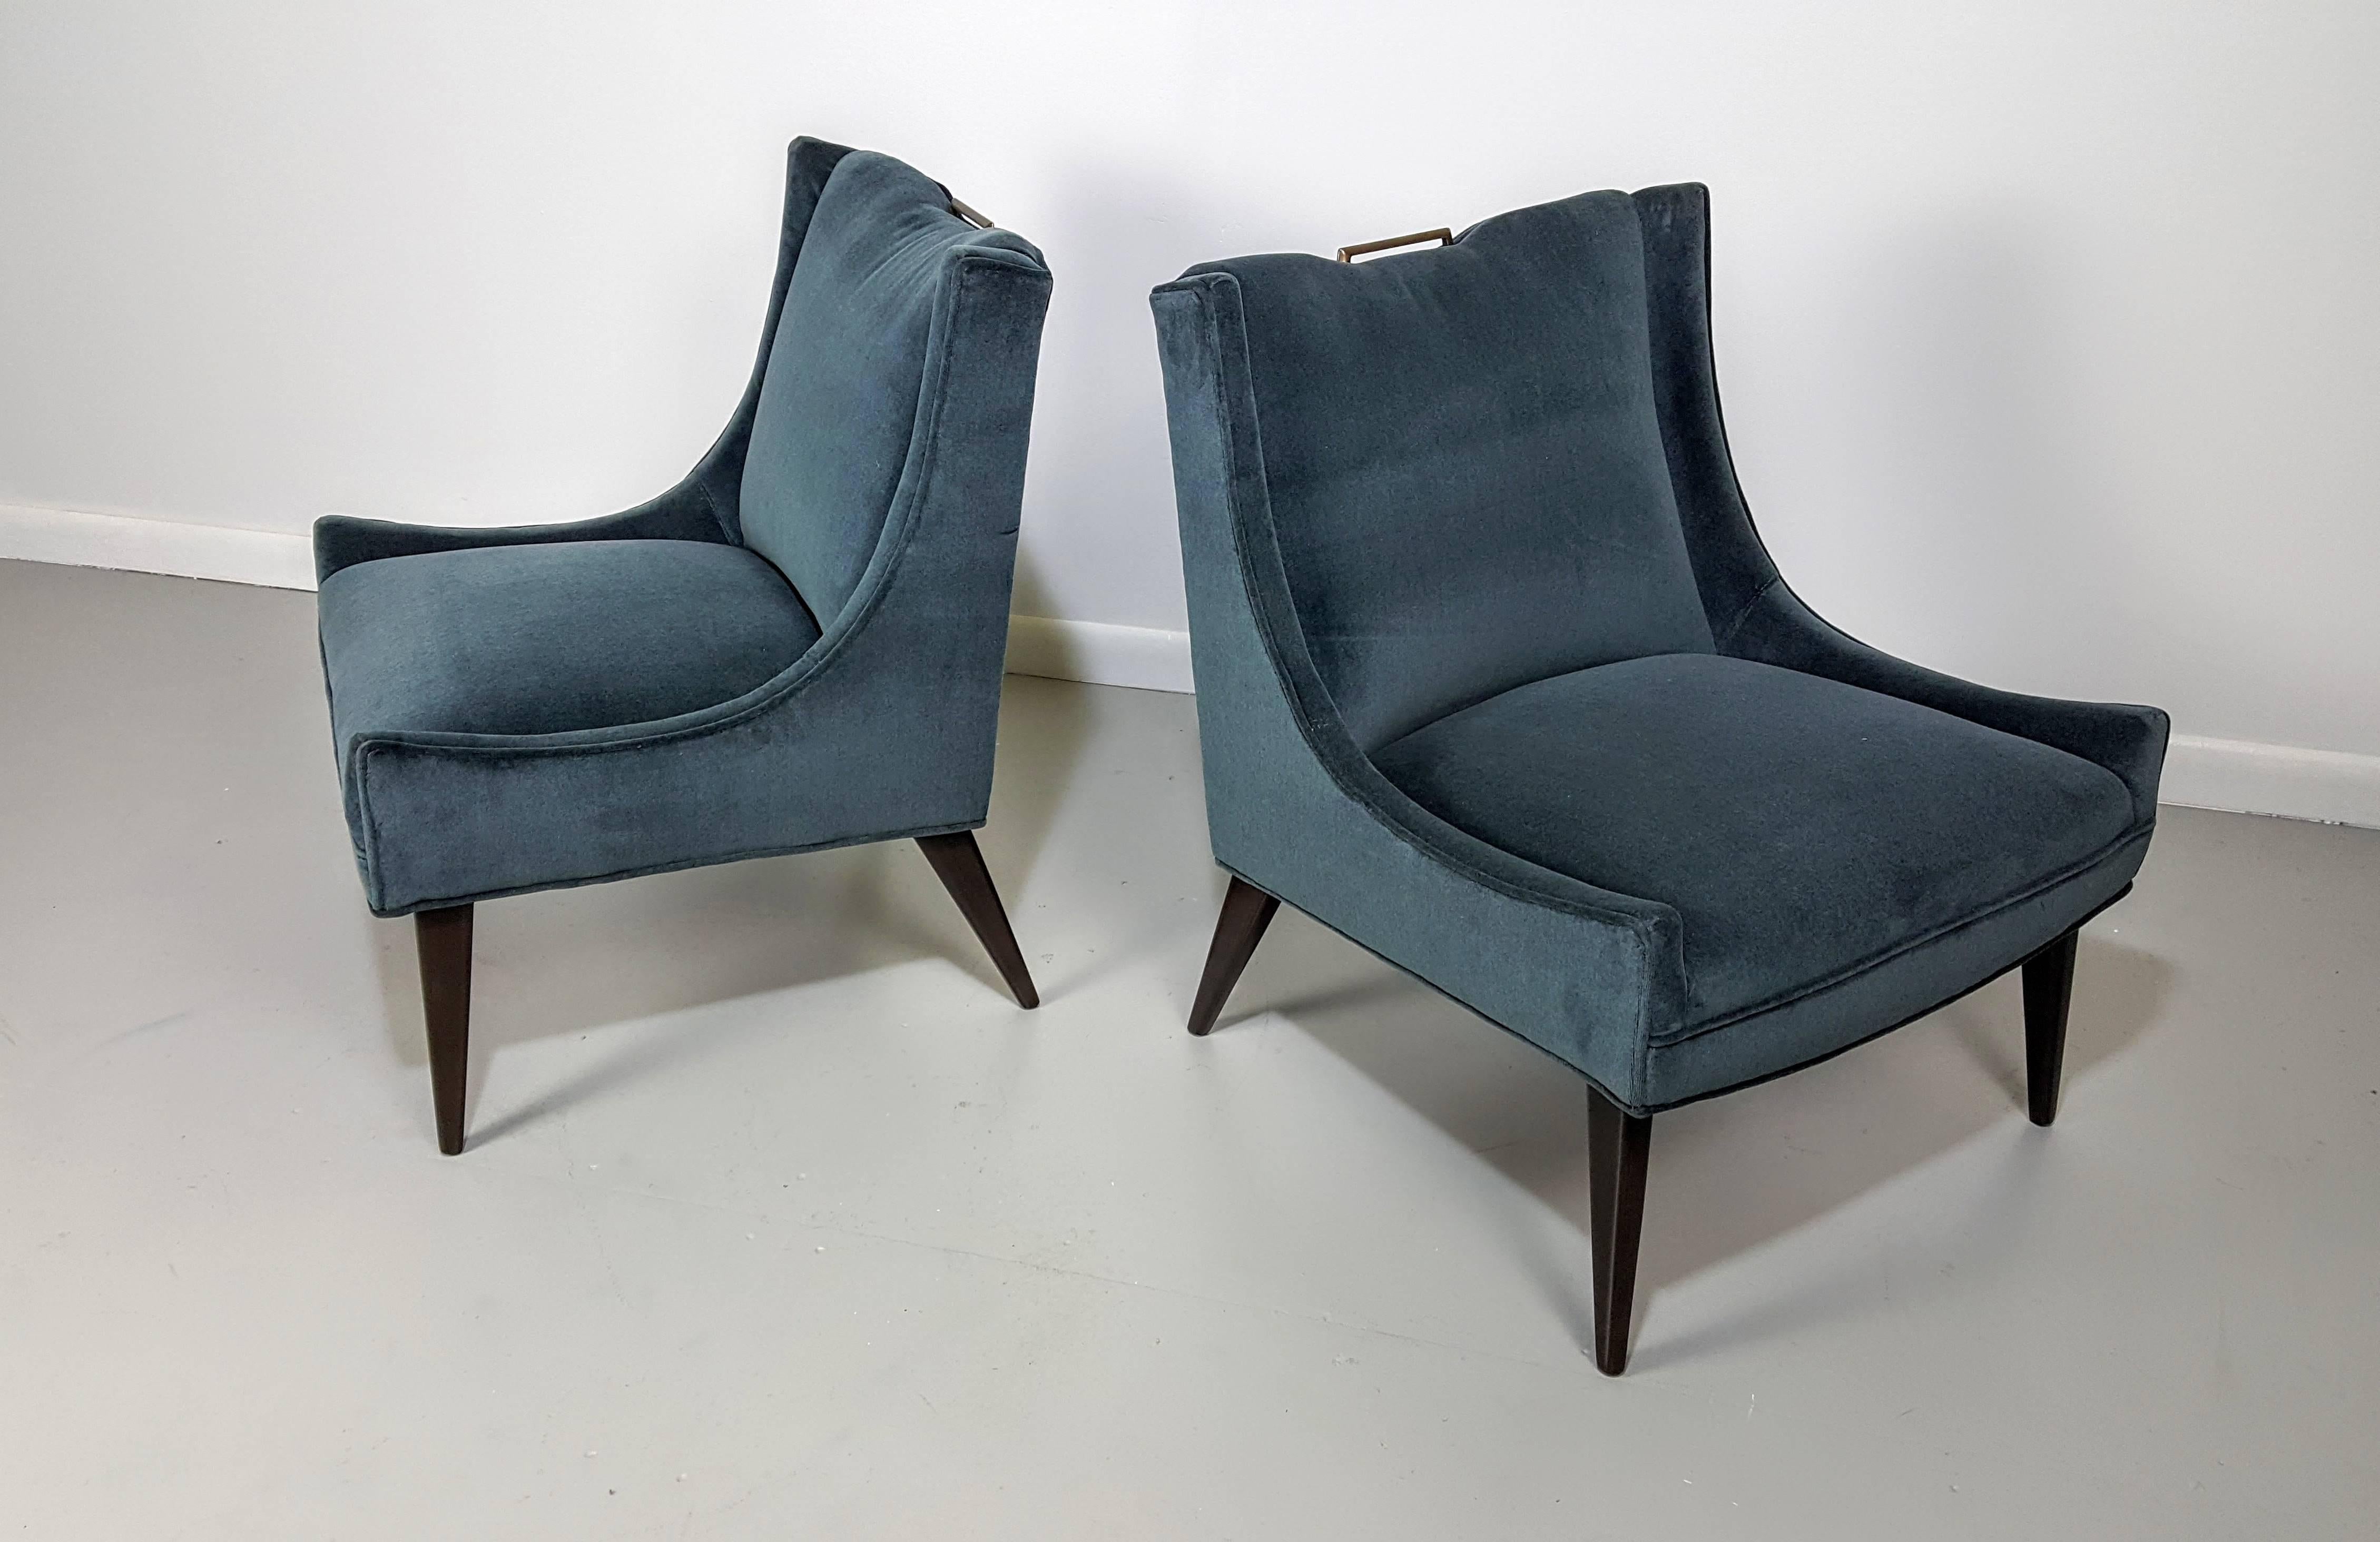 Pair of Mohair slipper chairs in the manner of Harvey Probber, 1950s. Dark walnut legs with patinated brass detail. Gorgeous scale and quality.
We offer free regular deliveries to NYC and Philadelphia area. Delivery to DC, MD, CT and MA are